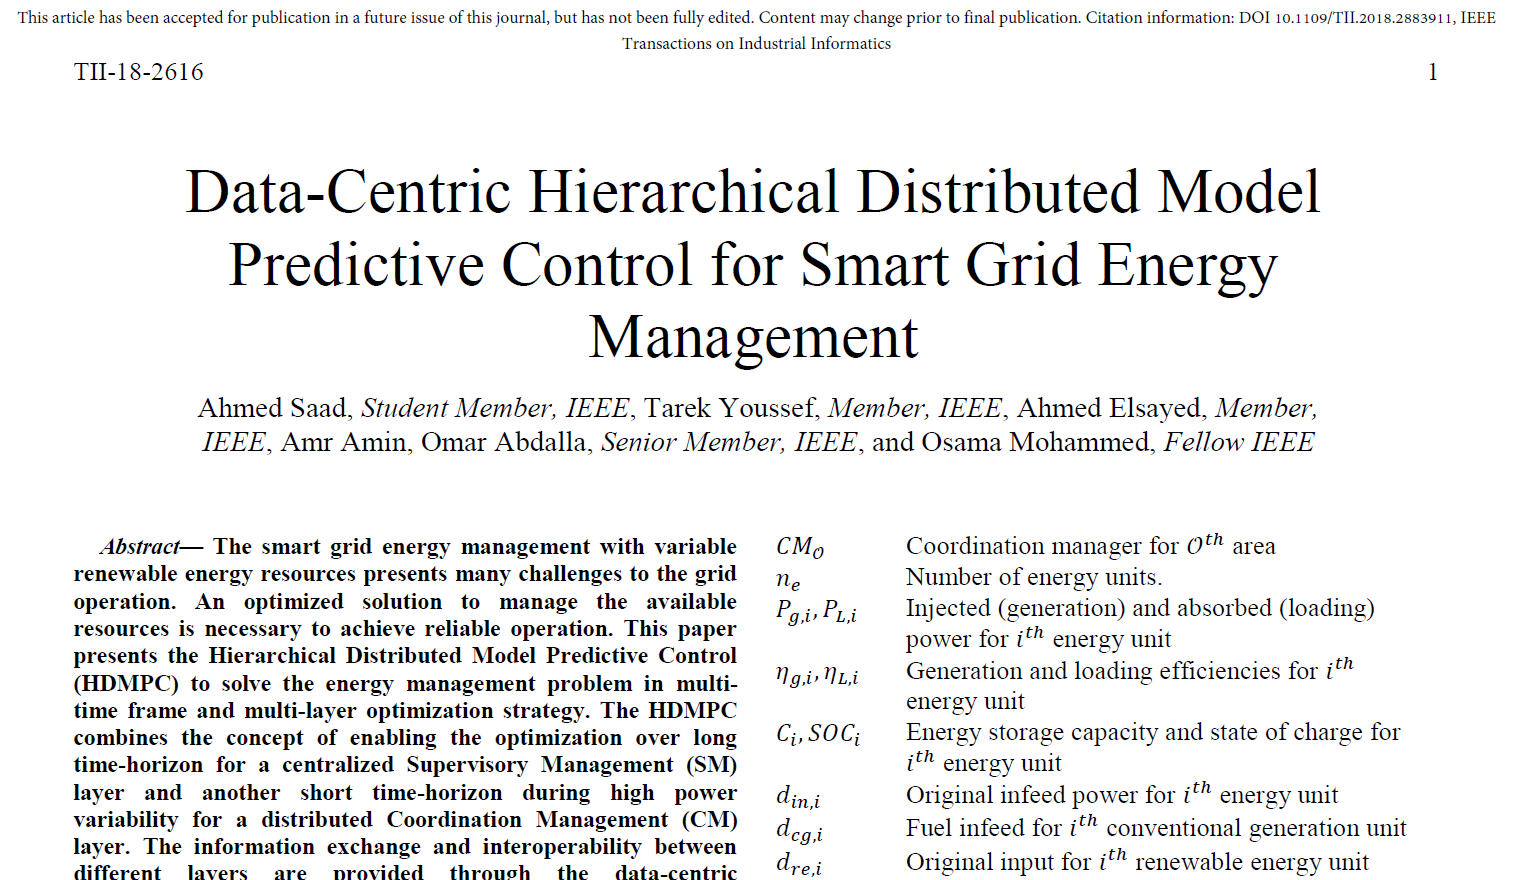 Data-Centric Hierarchical Distributed Model Predictive Control for Smart Grid Energy Management